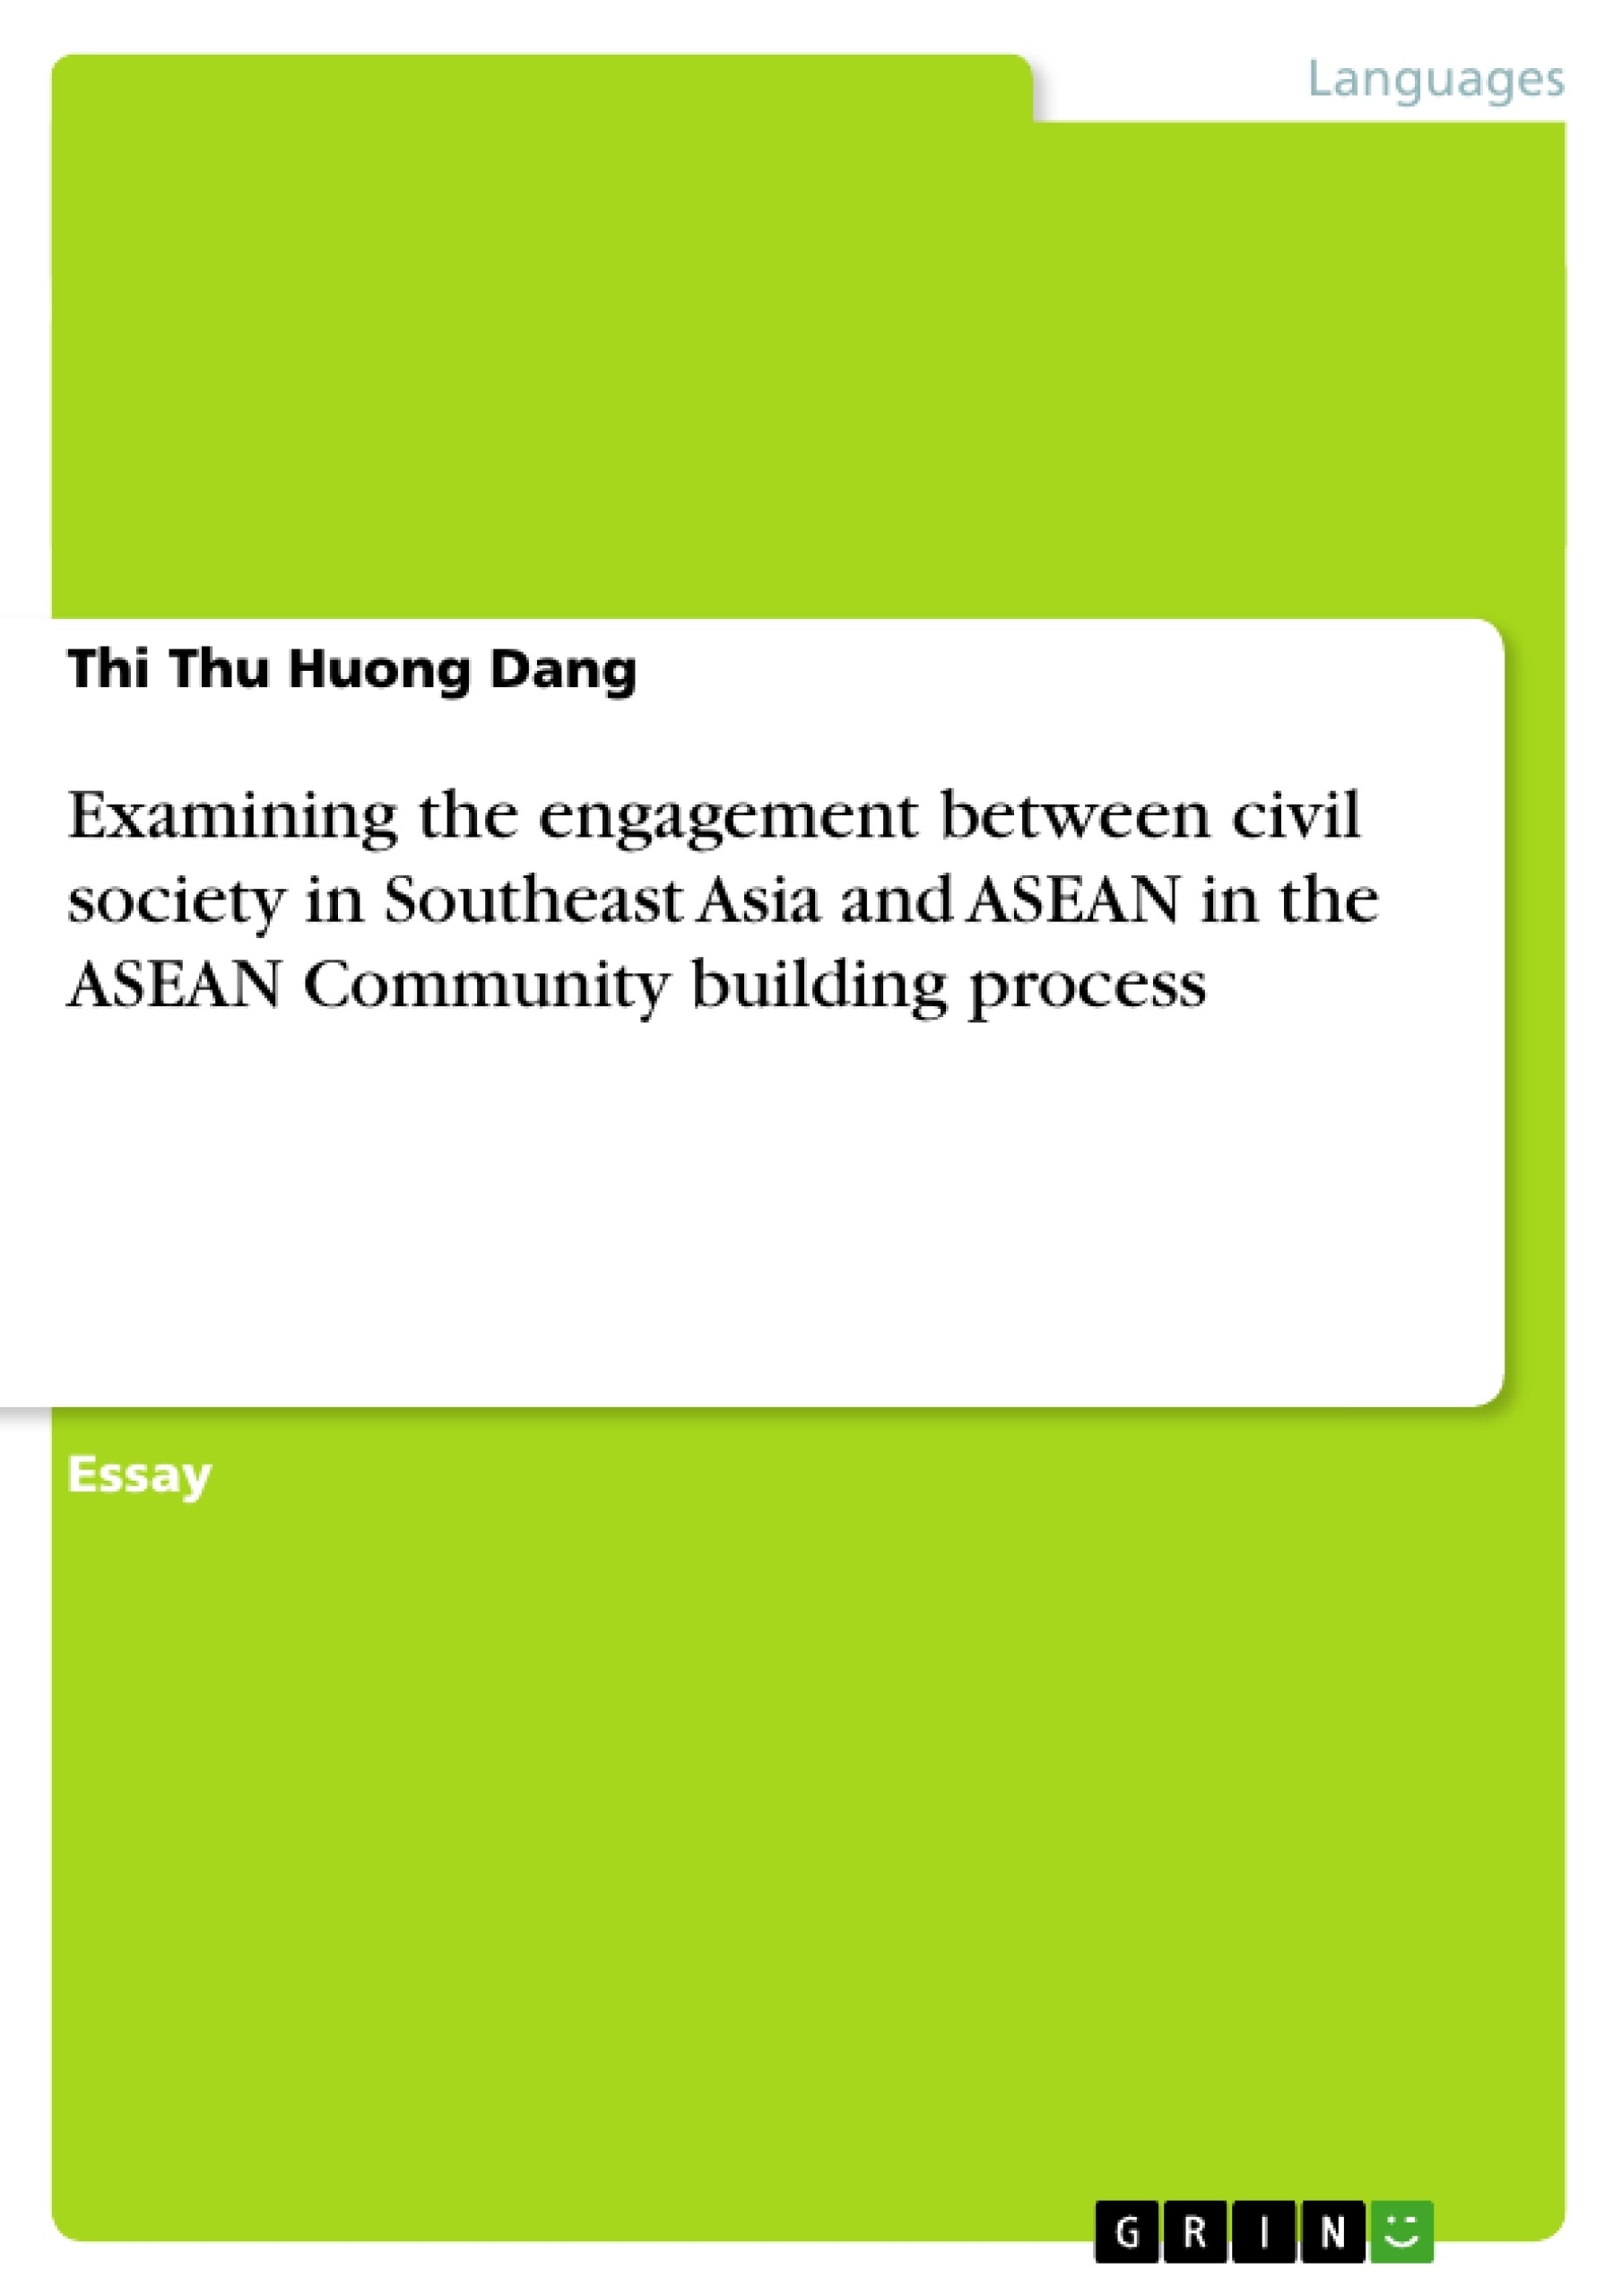 Titel: Examining the engagement between civil society in Southeast Asia and ASEAN in the ASEAN Community building process